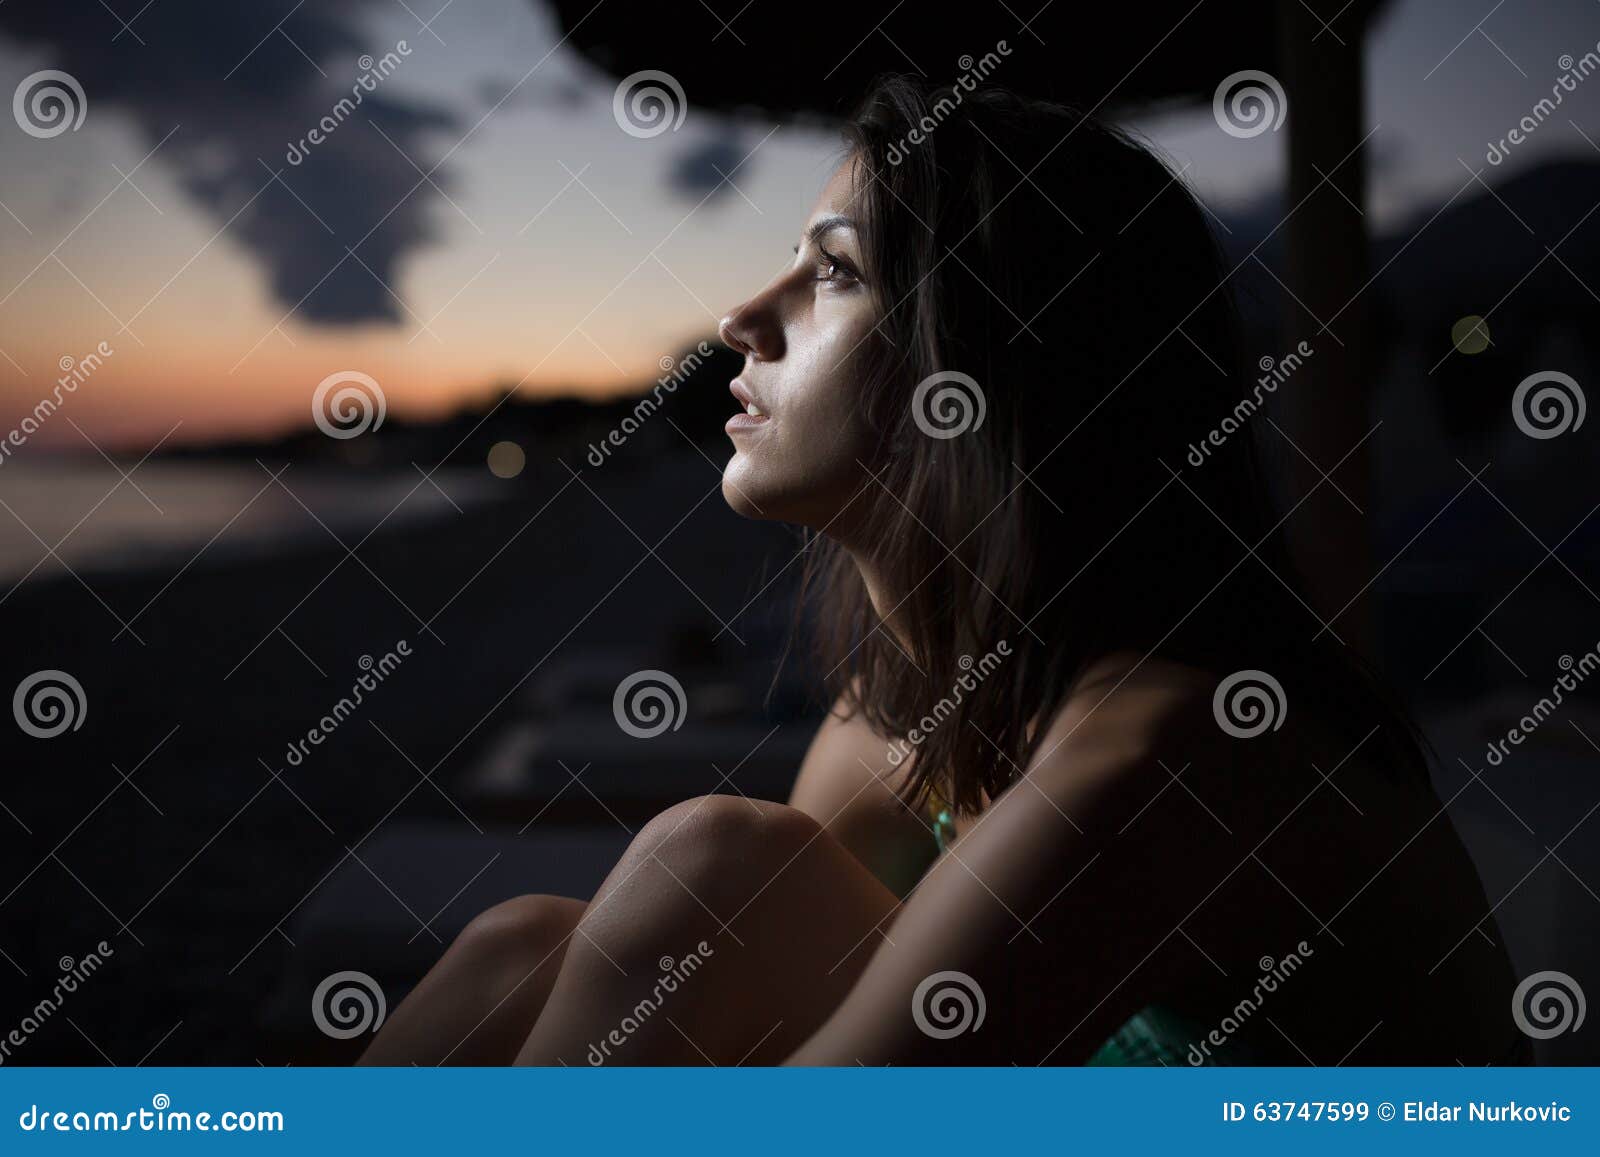 woman watching the ocean,sea horizon with a moon on the sky.eclipse of the moon.eclipse of the sun